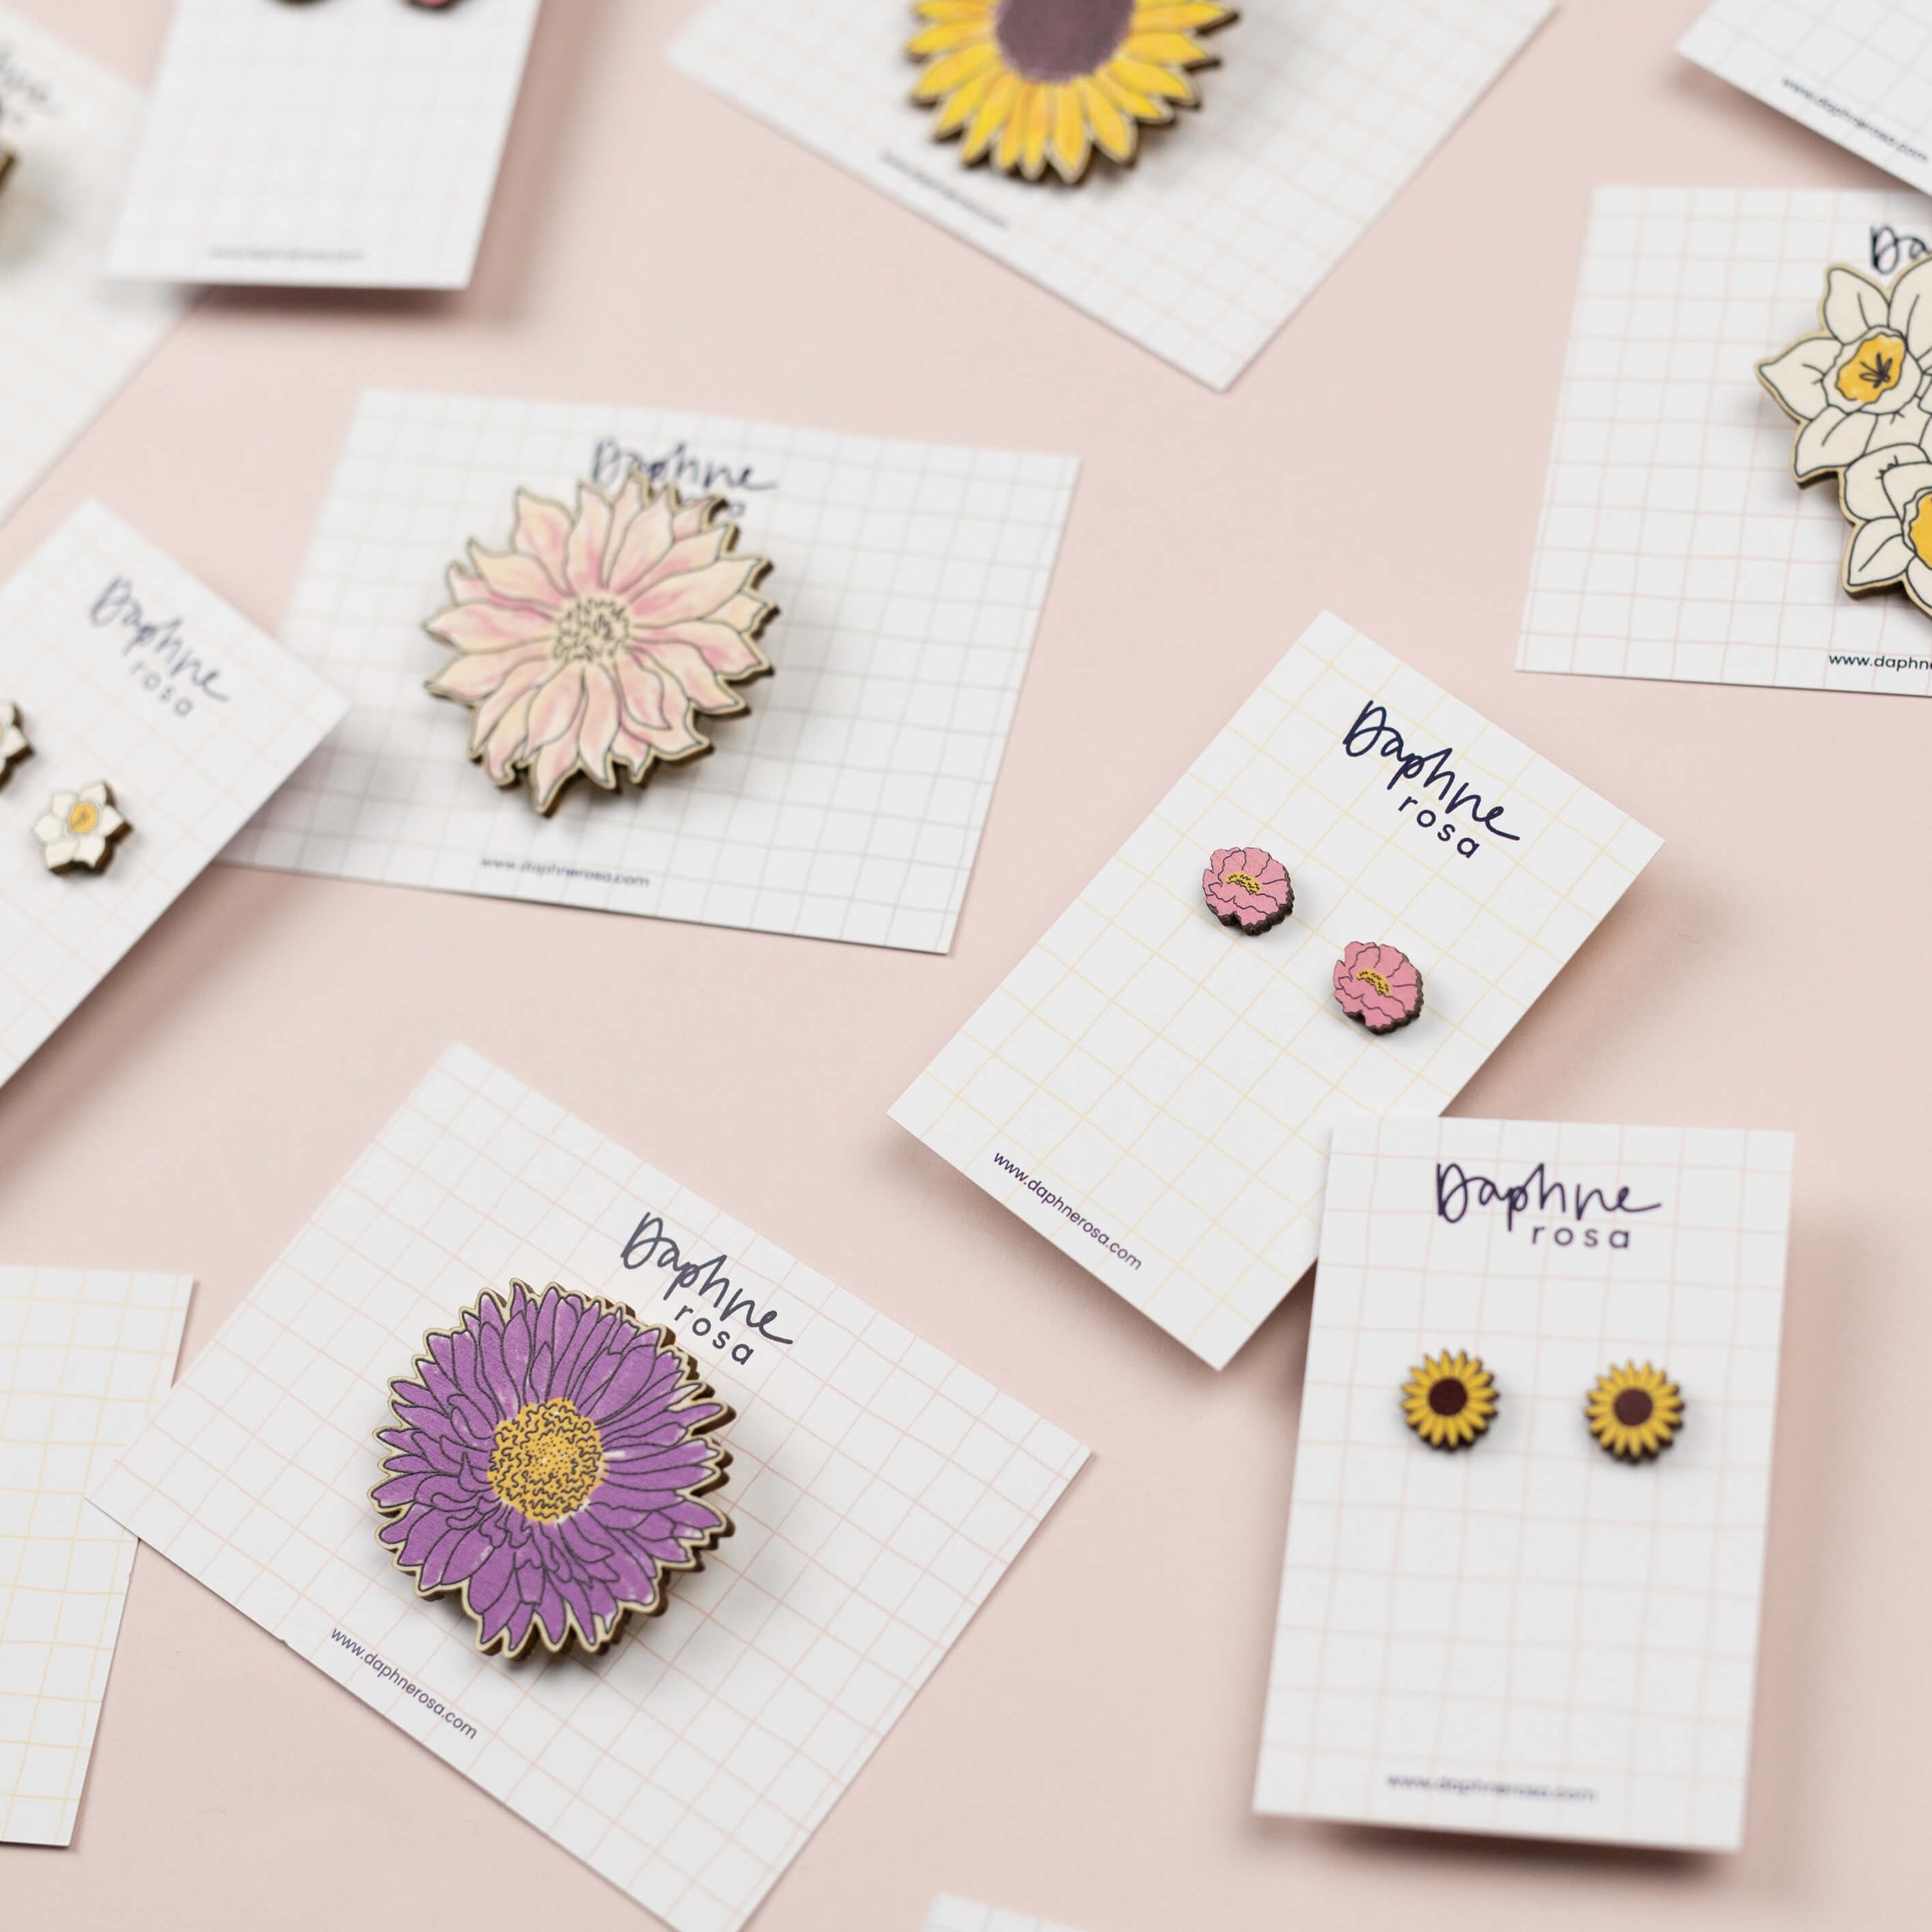 DaphneRosa - wooden floral earrings and brooches.jpg